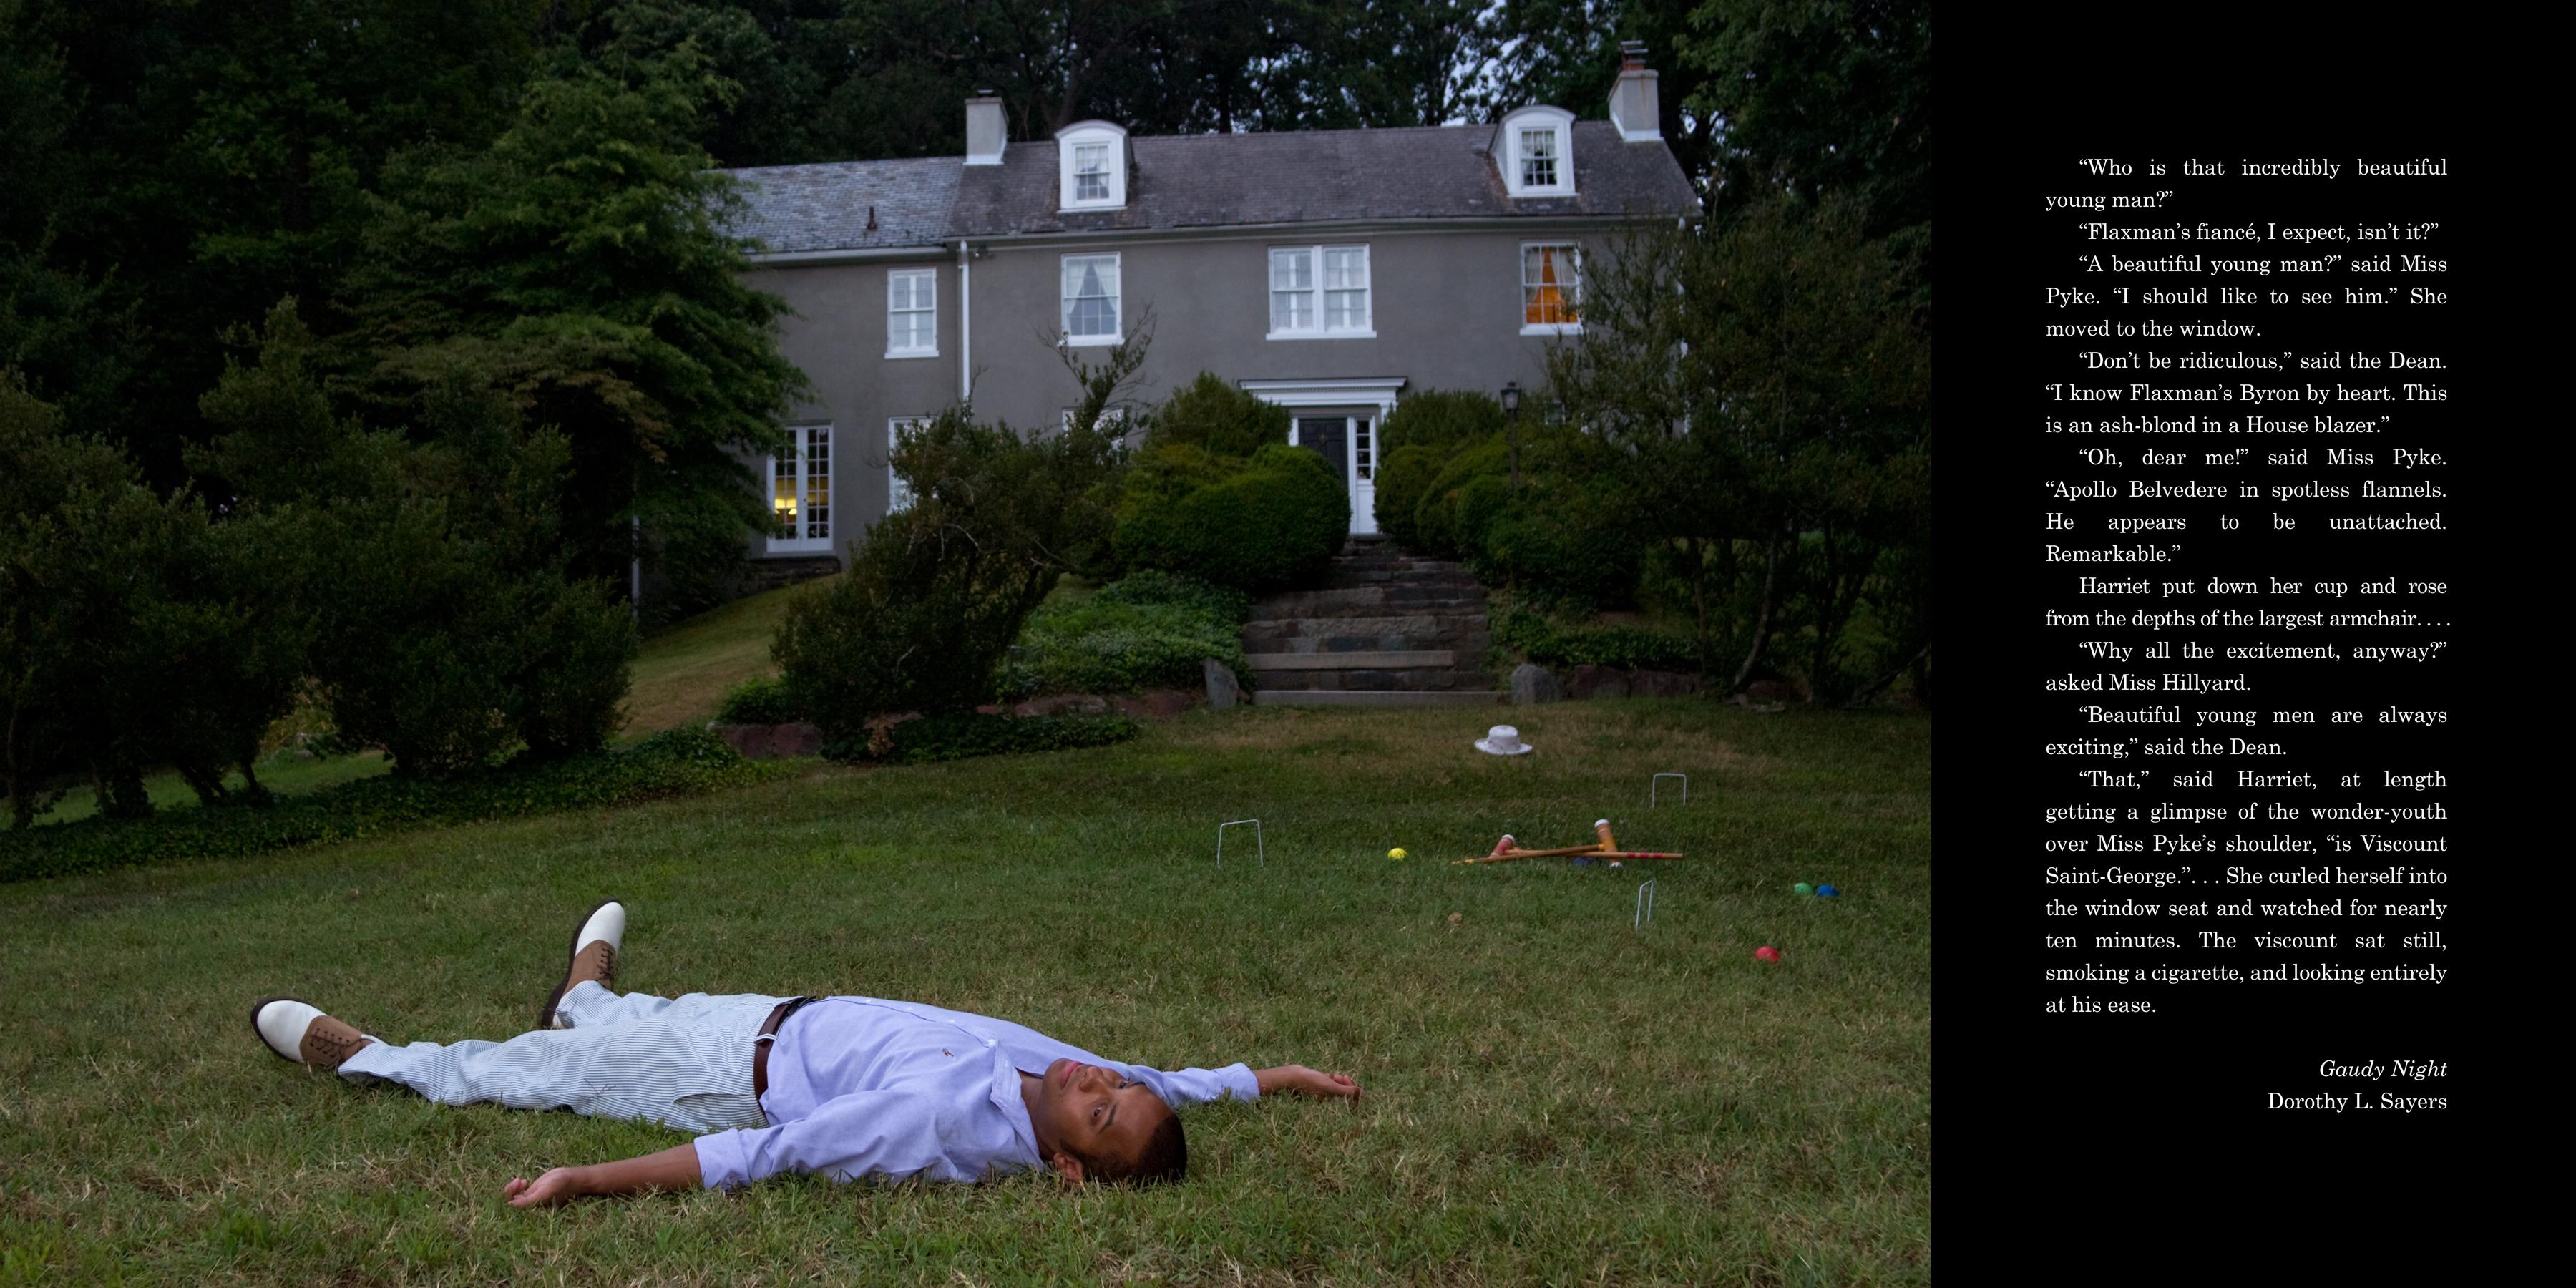 “Easy on the Eyes: Harriet“ is a staged photograph of an attractive man lying on the lawn. In this cinematic photo series, I explore the female gaze by providing visual pleasure specifically designed for a female viewer—though others may look over